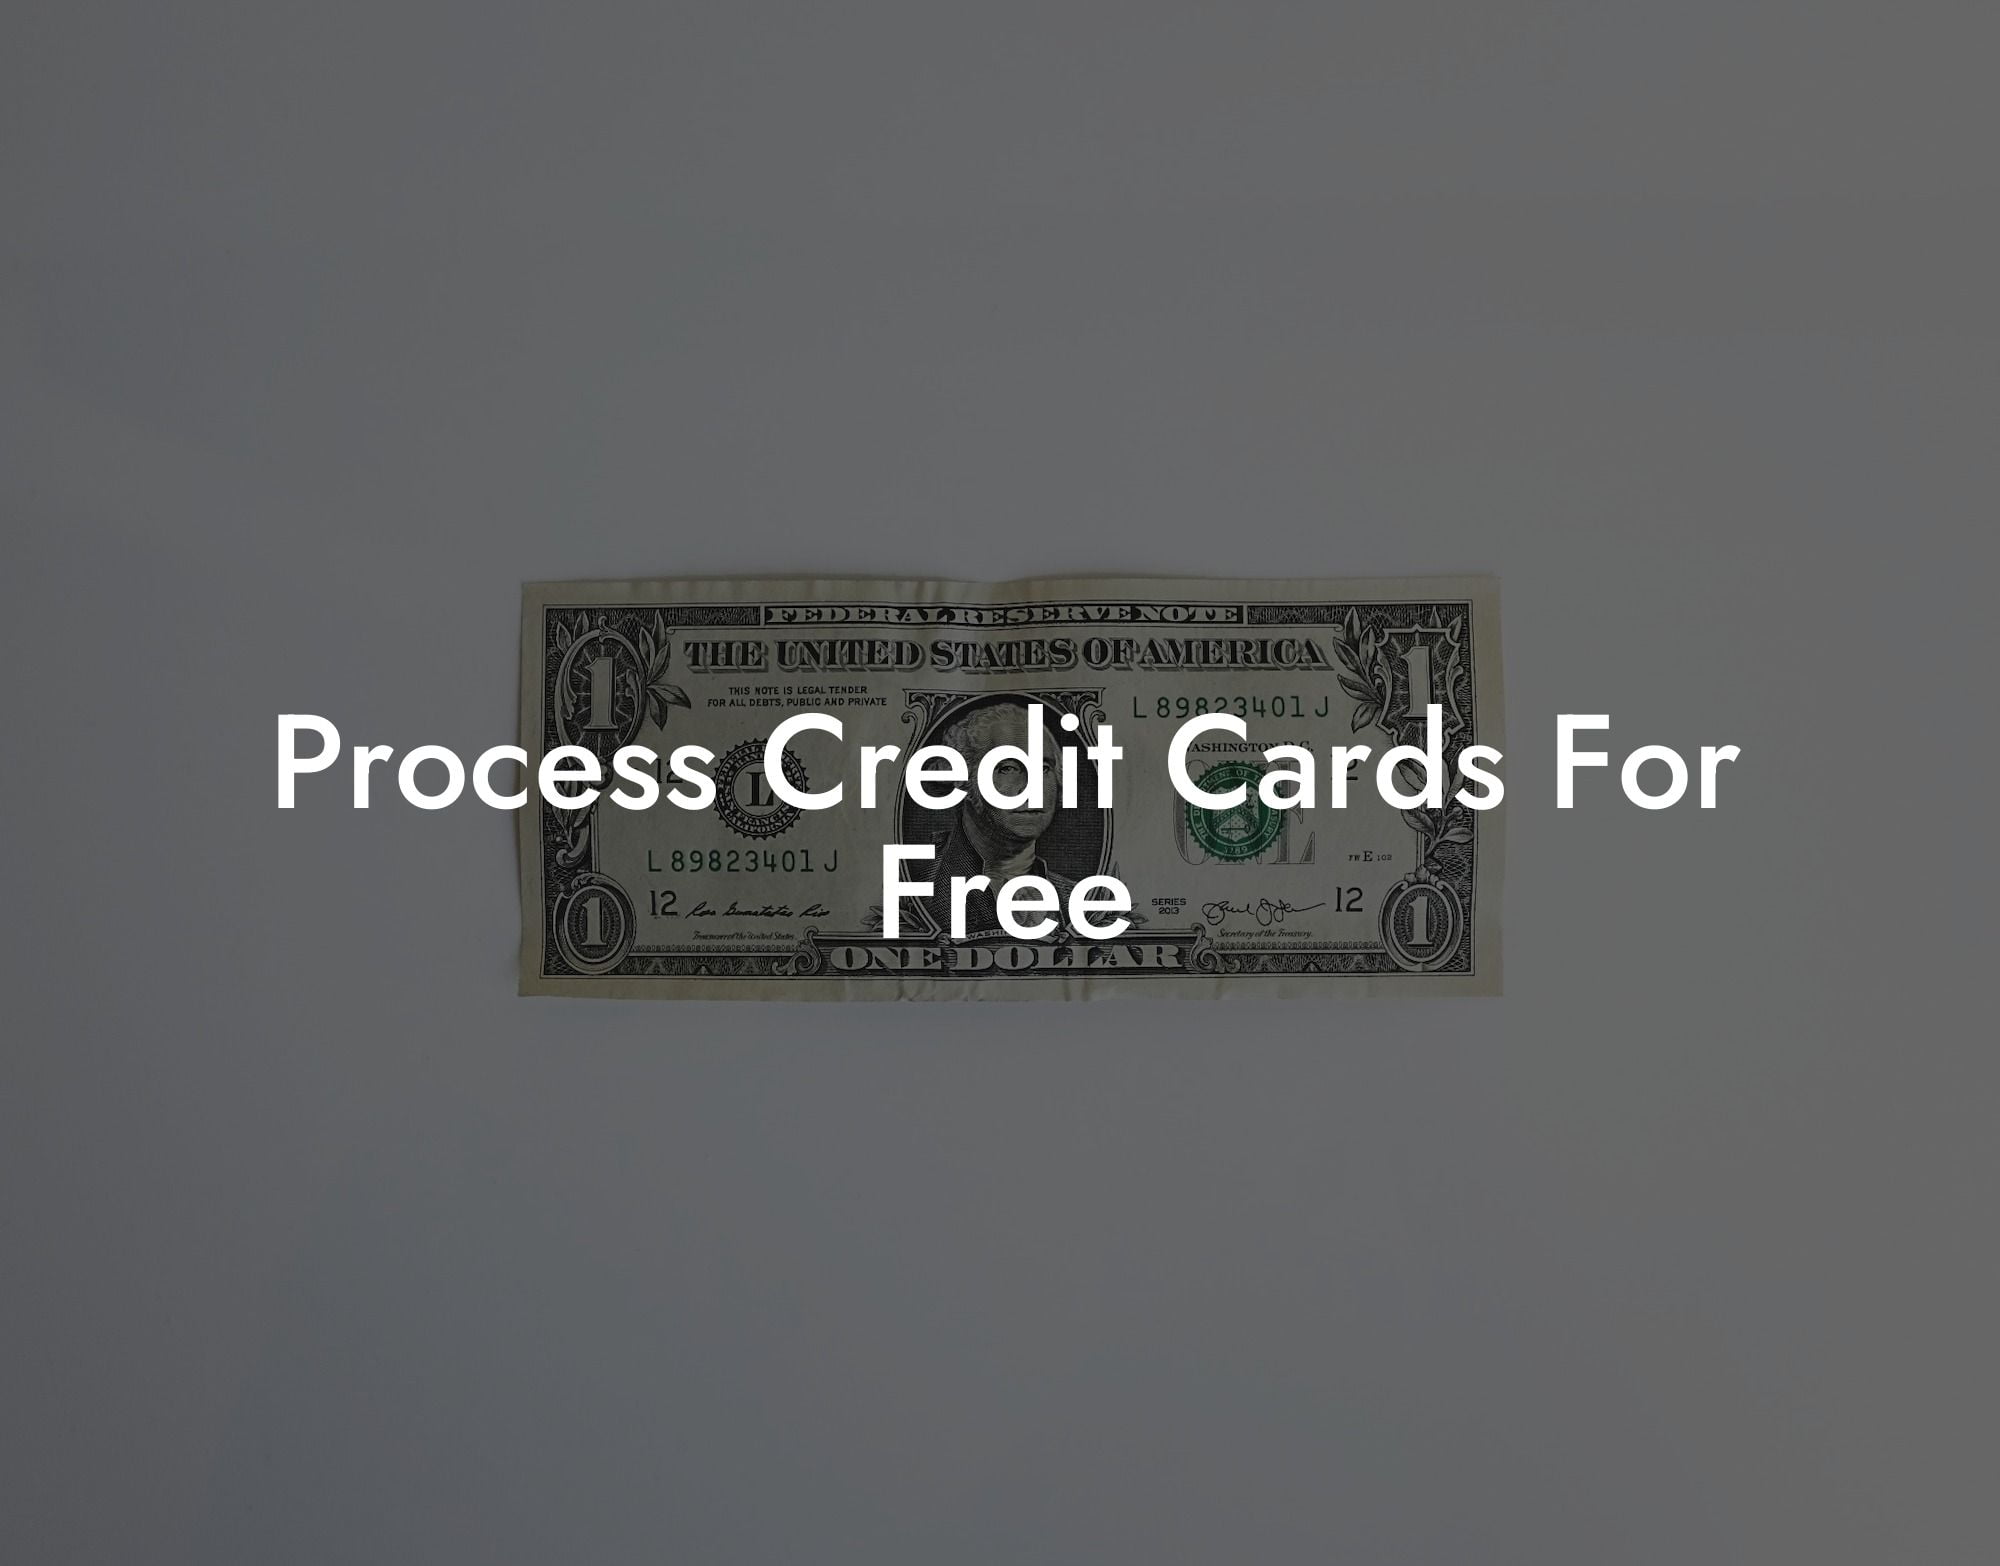 Process Credit Cards For Free